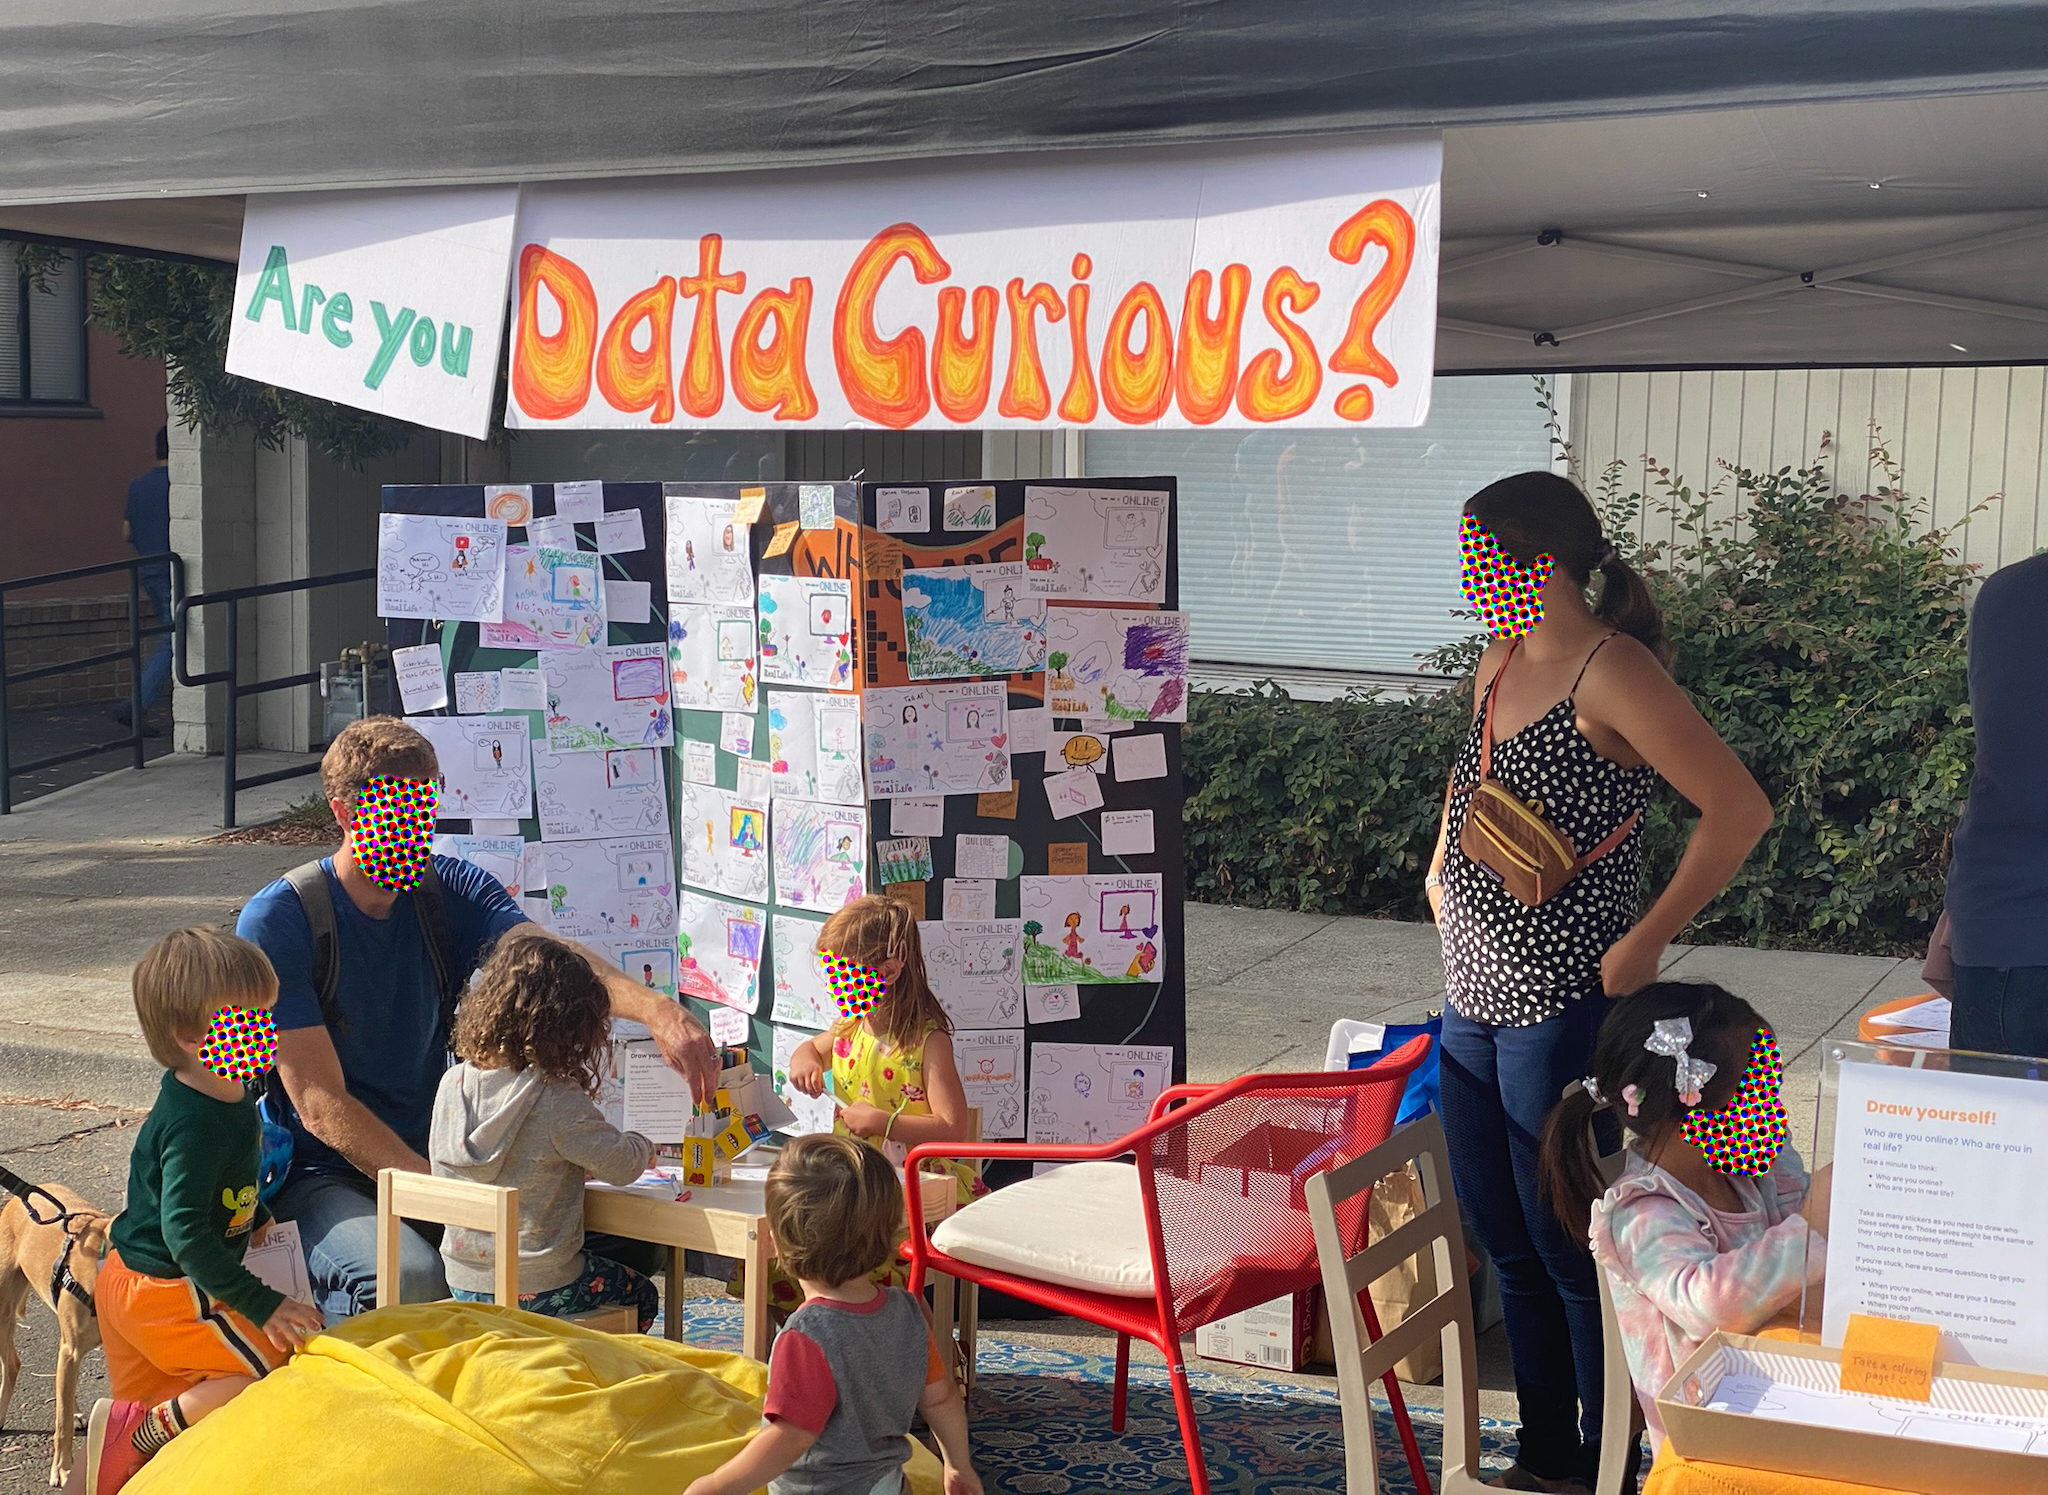 Two parents and several preschool-aged children relax in the booth. Behind them is a board covered with coloring pages made by other participants, and hanging from the sun shade at the top of the image is a sign that reads, “Are you Data Curious?”